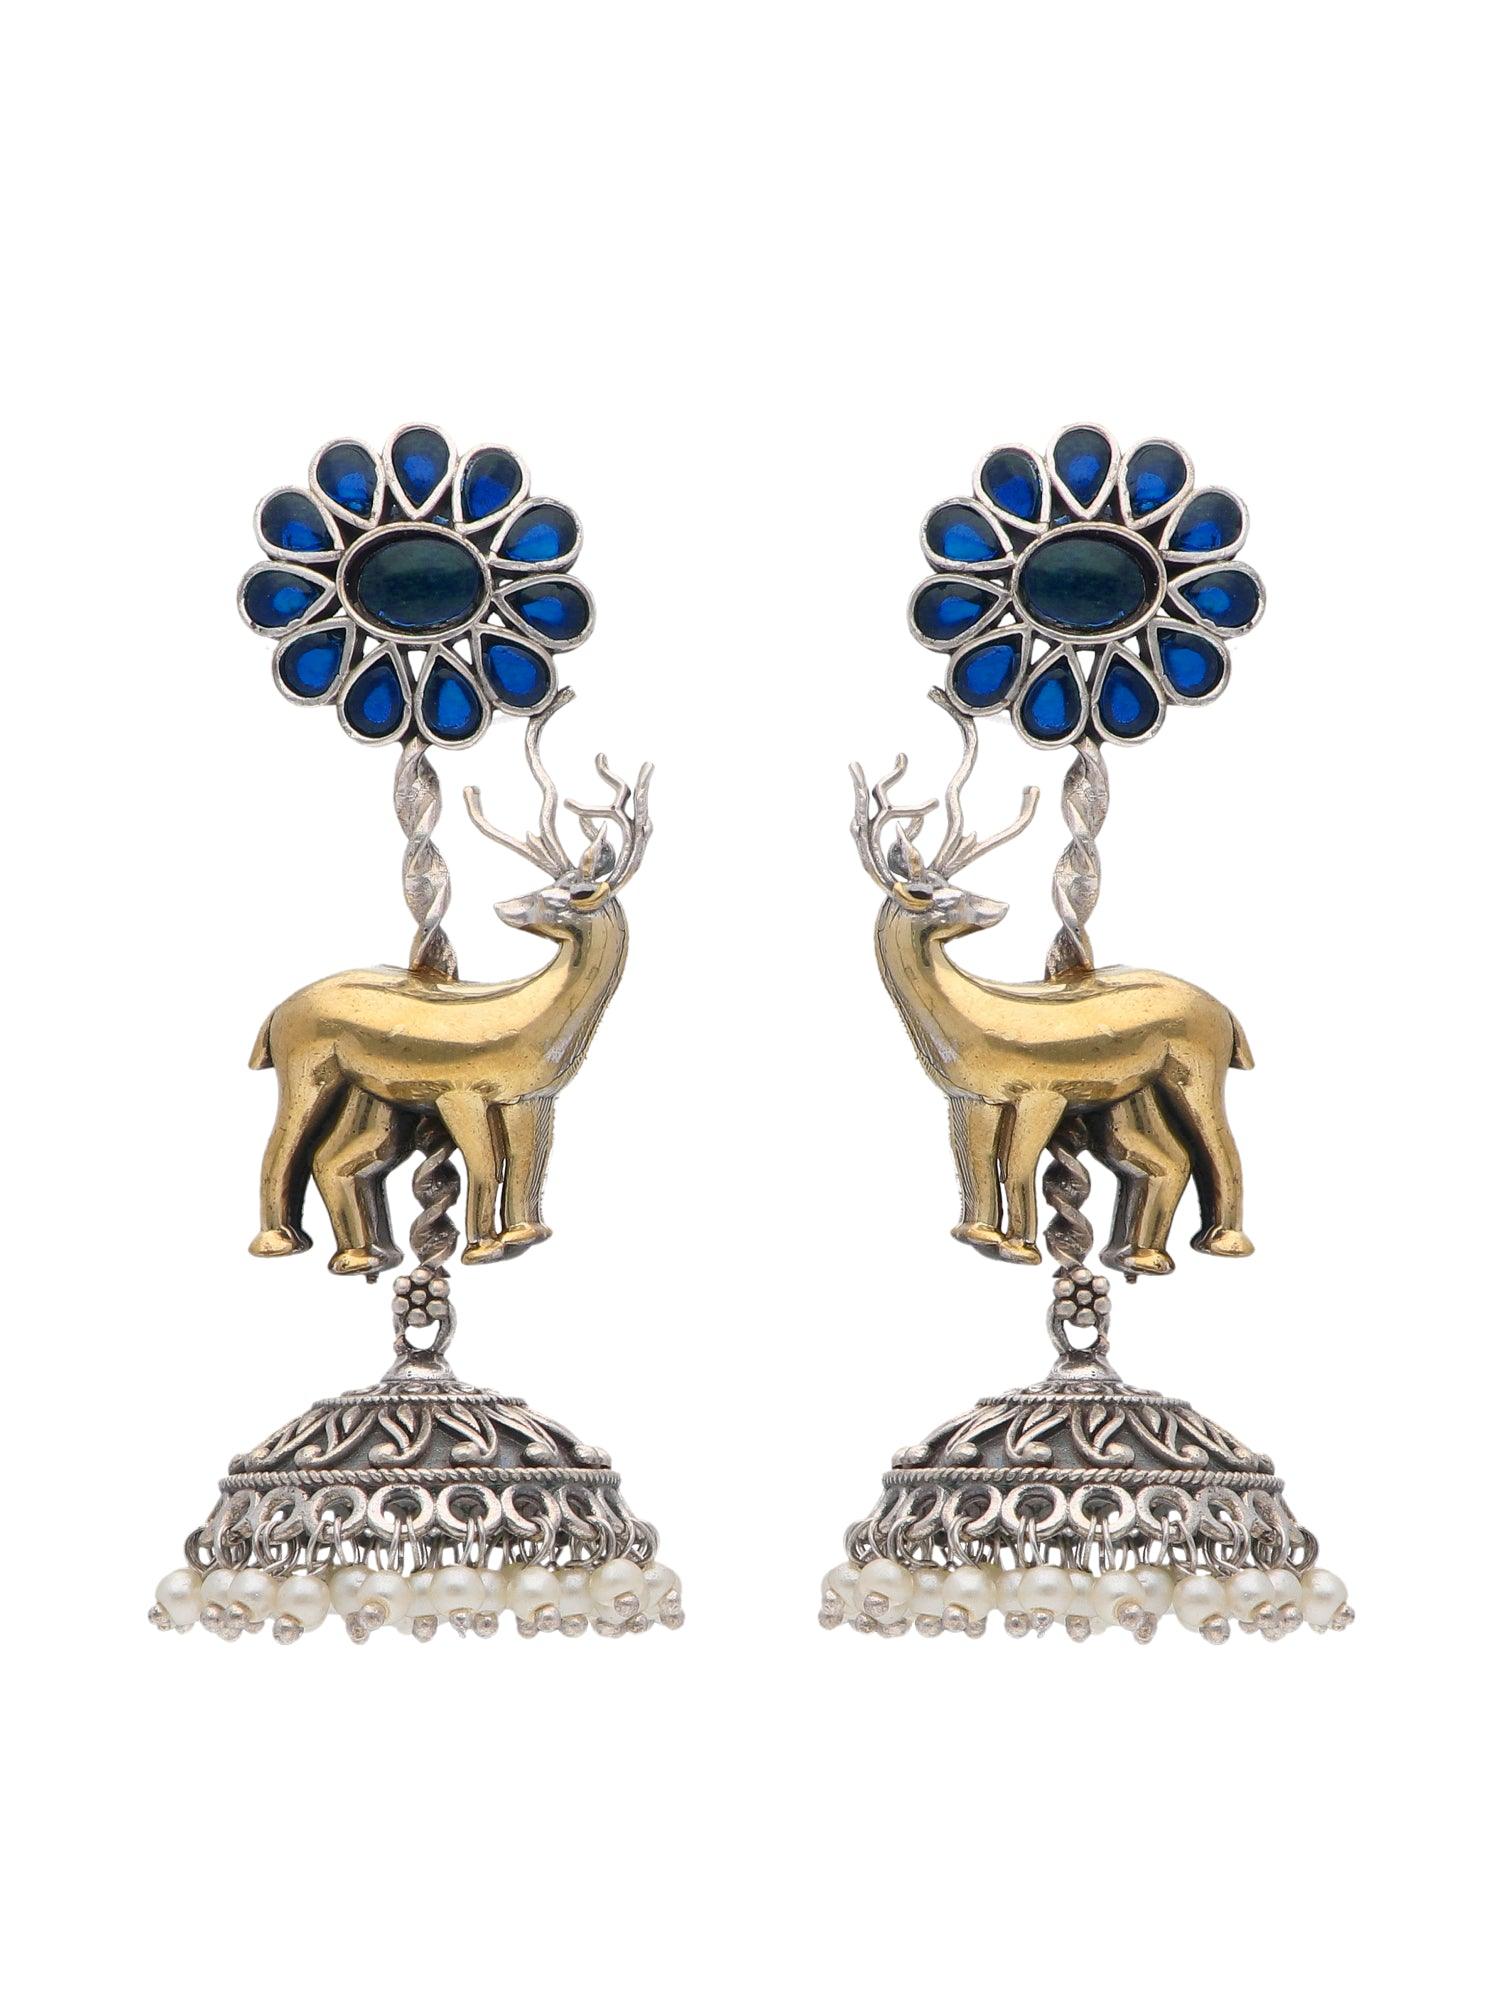 The Gypsy Midnight Bloom Stag Jhumki Earrings - Curio Cottage 